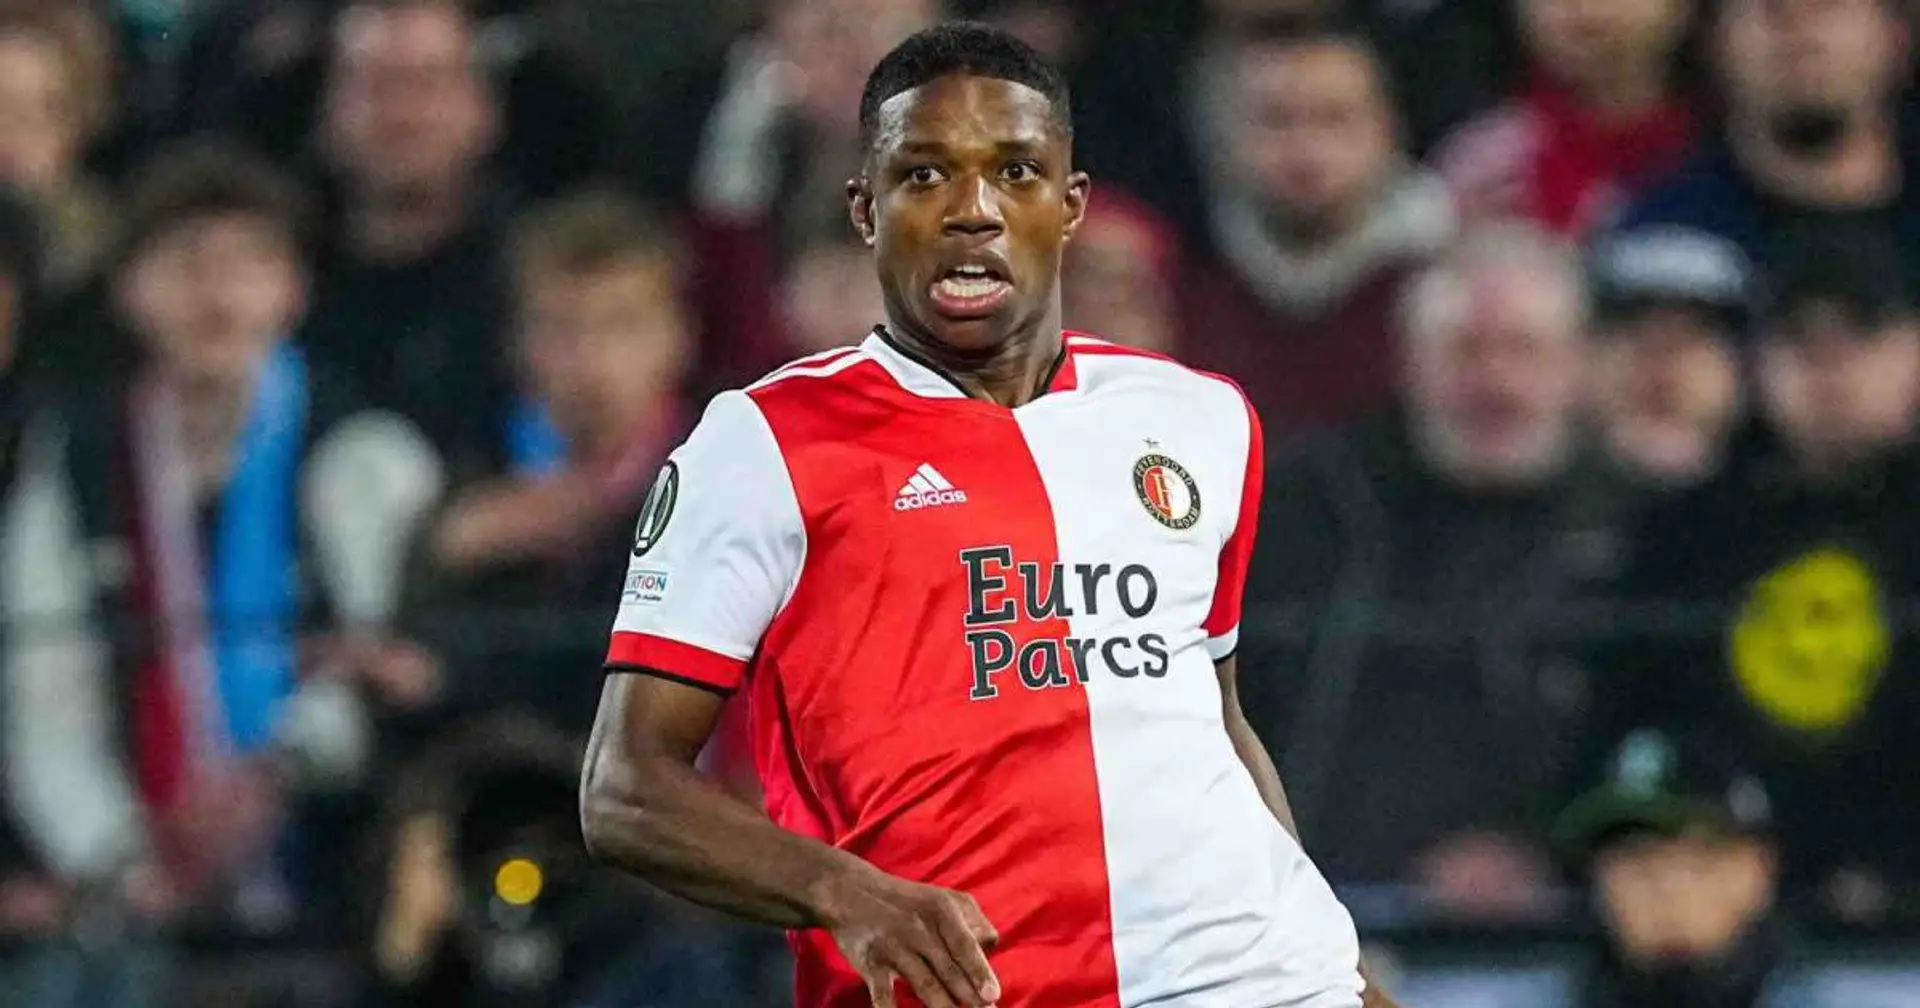 BREAKING: Man United reach agreement for Tyrell Malacia, Feyenoord sporting director confirms deal